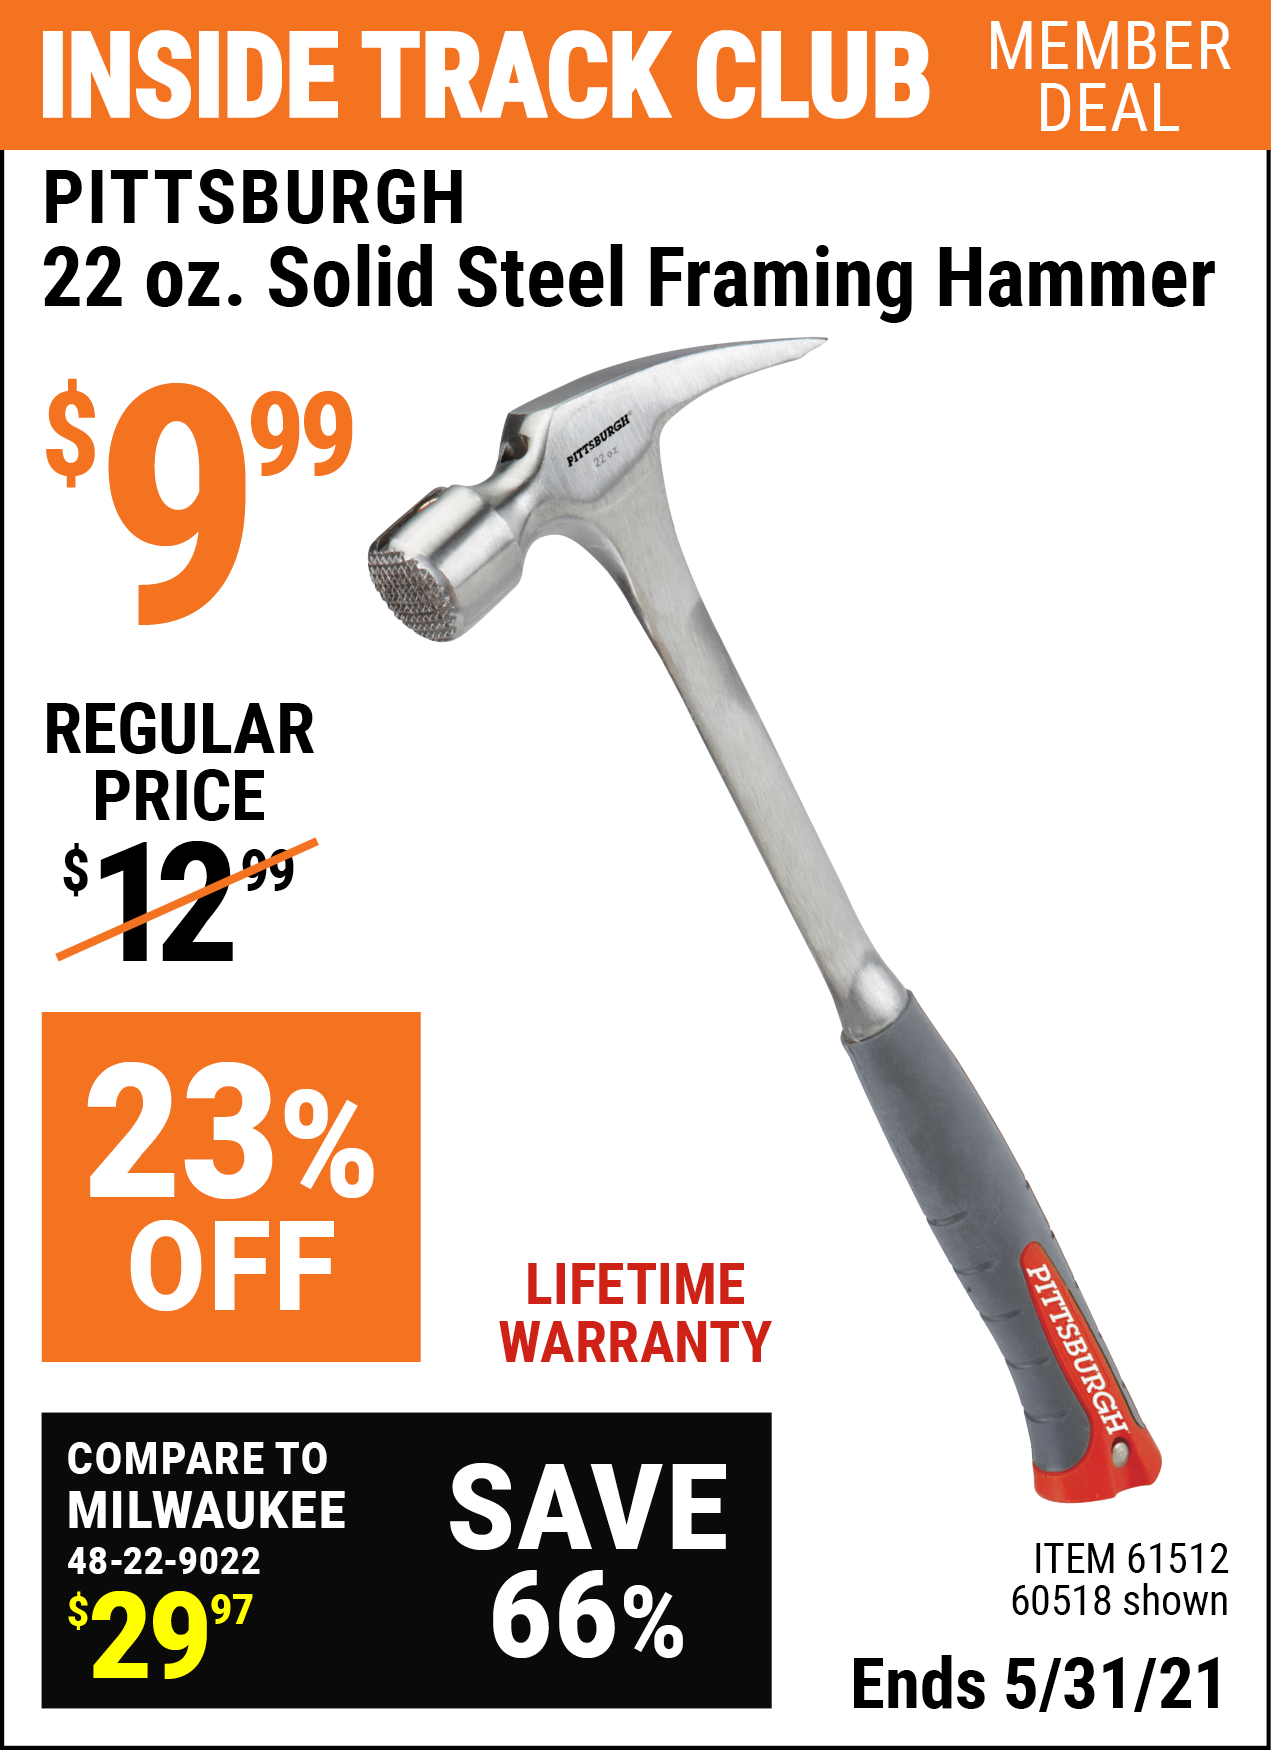 Inside Track Club members can buy the PITTSBURGH 22 Oz. Solid Steel Framing Hammer (Item 61512/60518) for $9.99, valid through 5/31/2021.